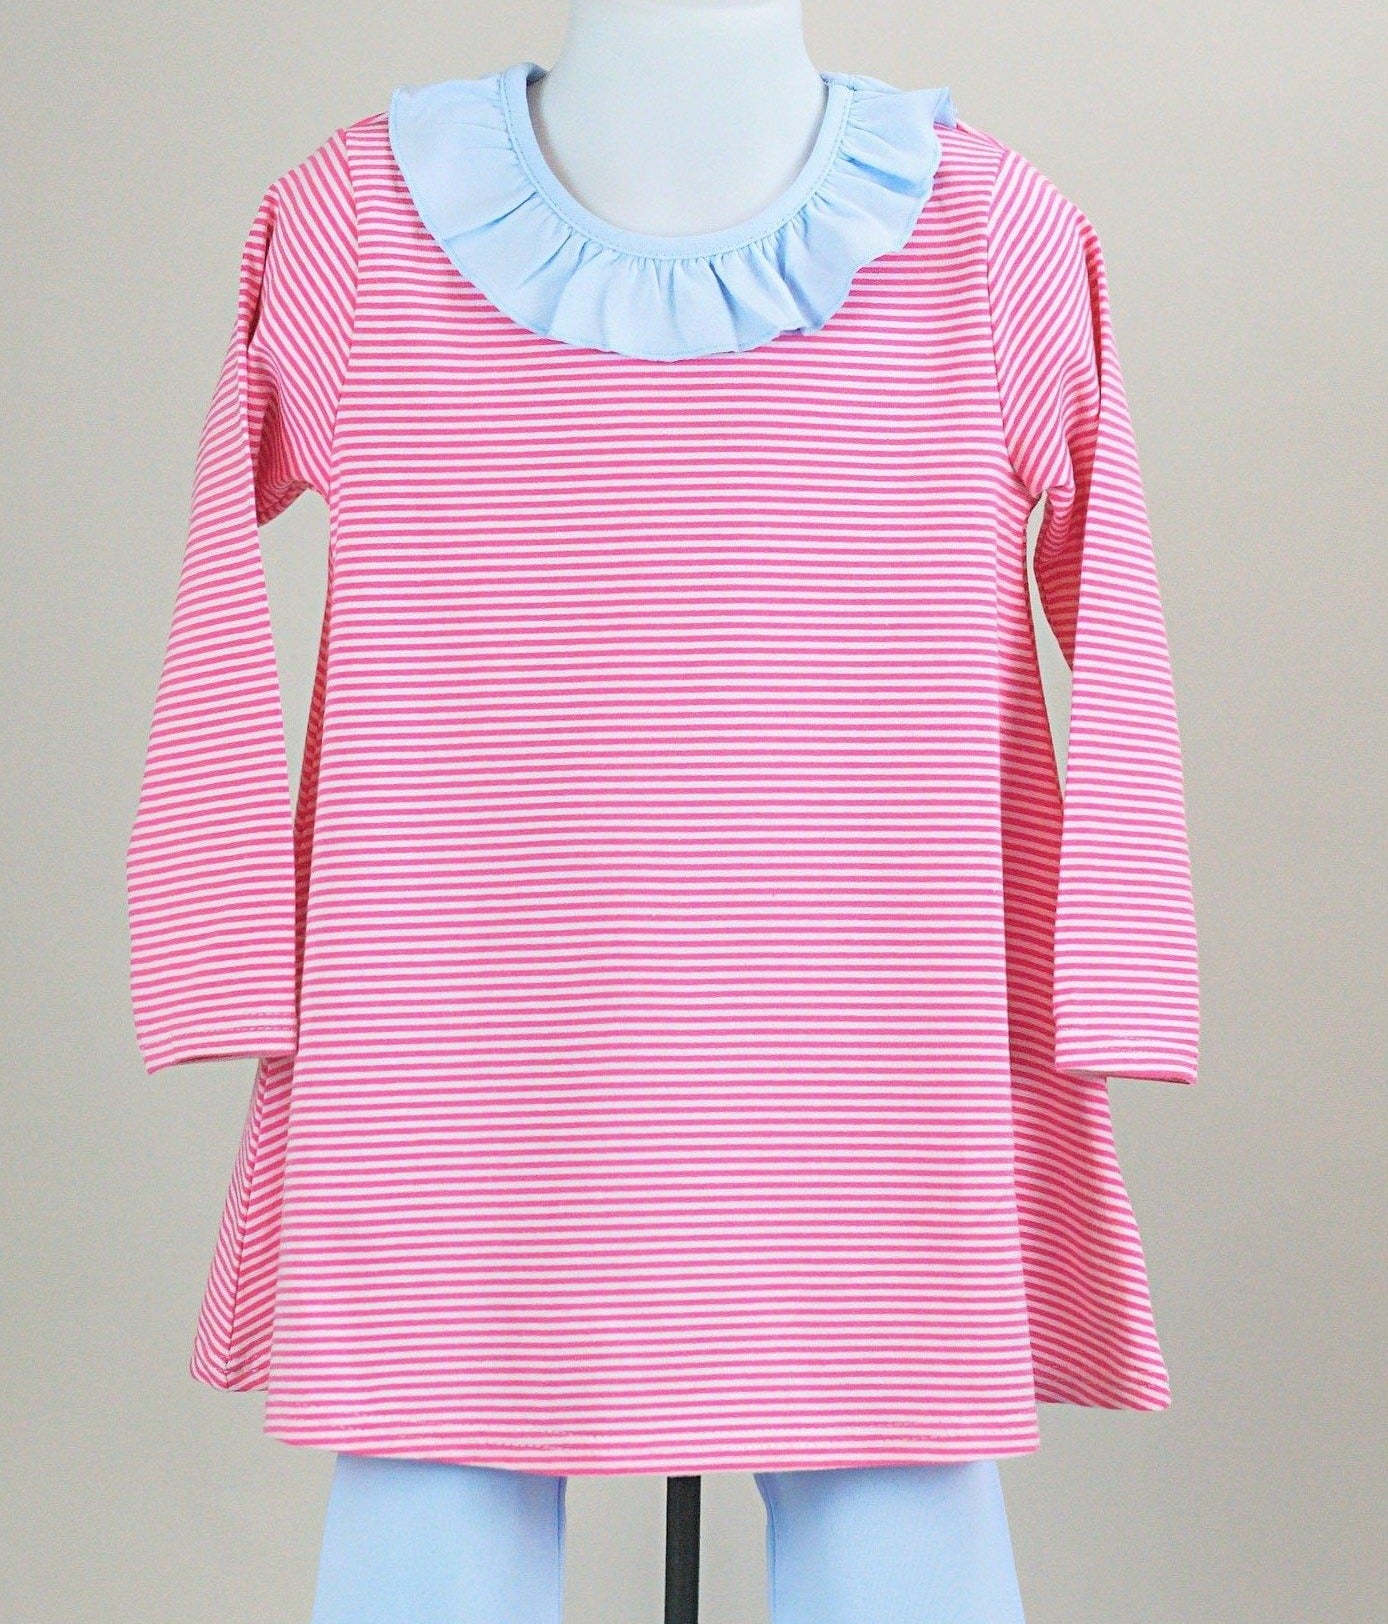 Hot pink stripes Swing top tunic/ solid blue ruffle